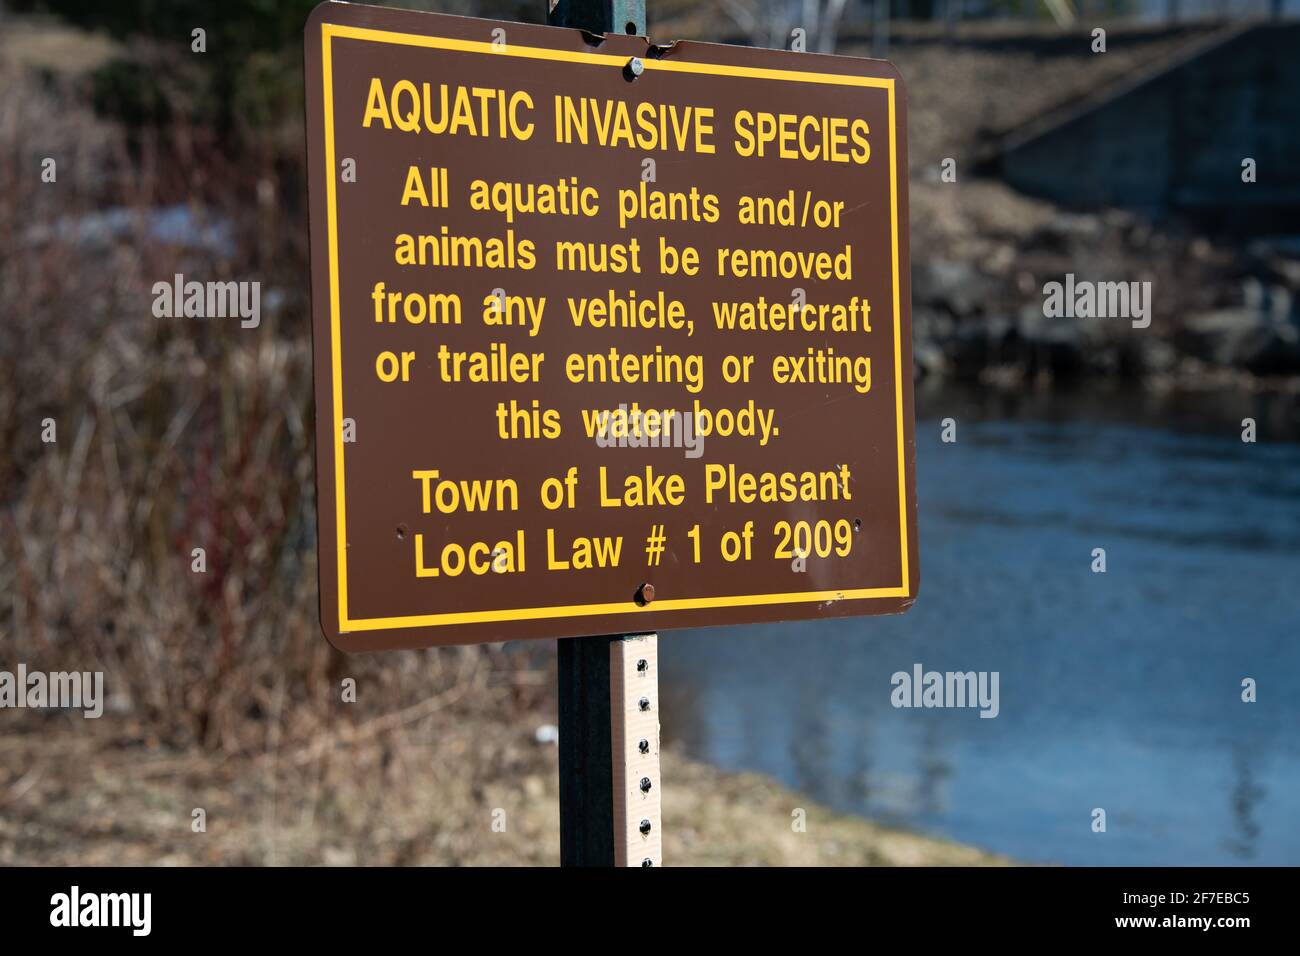 A sign on the Sacandaga River requiring aquatic plants and animals must be removed from vehicles, watercraft or trailers entering this water. Stock Photo